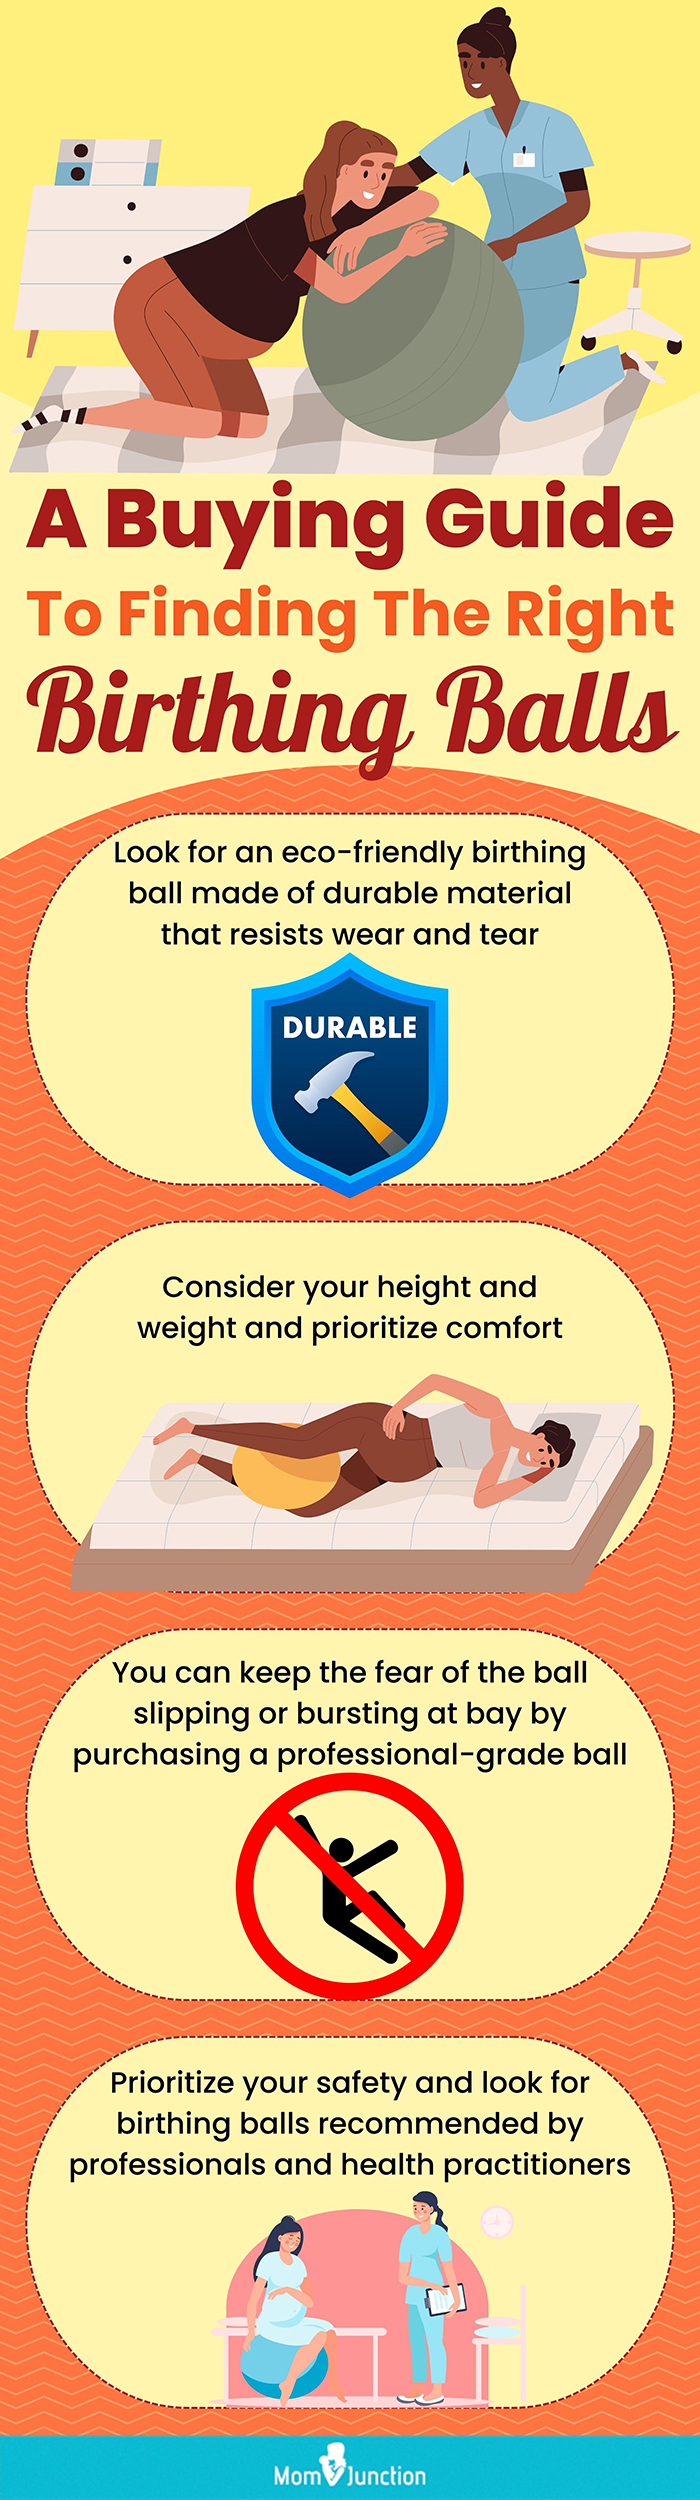 A Buying Guide To Finding The Right Birthing Balls (infographic)